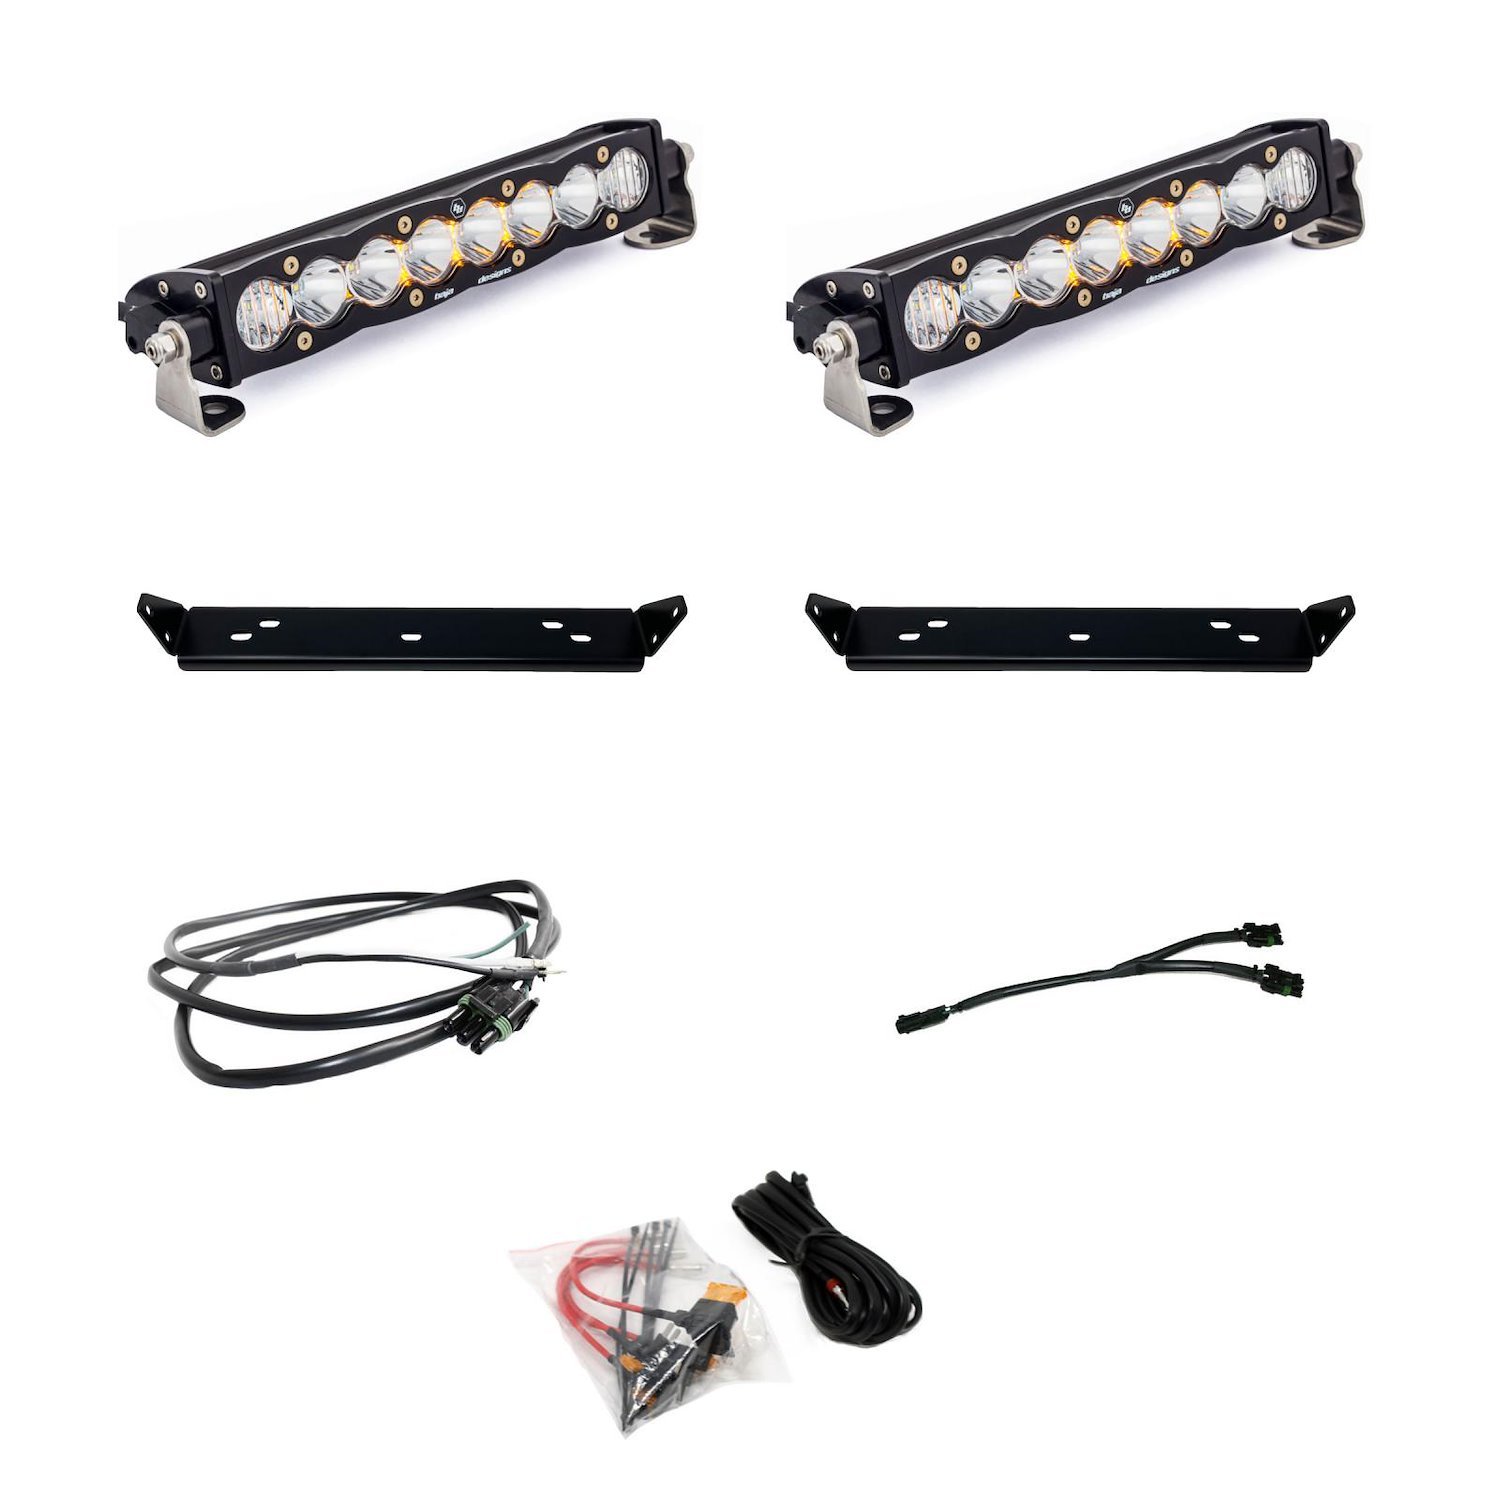 S8 10 in. Dual Behind Grille Light Bar Kit for 2021-2022 Ford F-150 Raptor